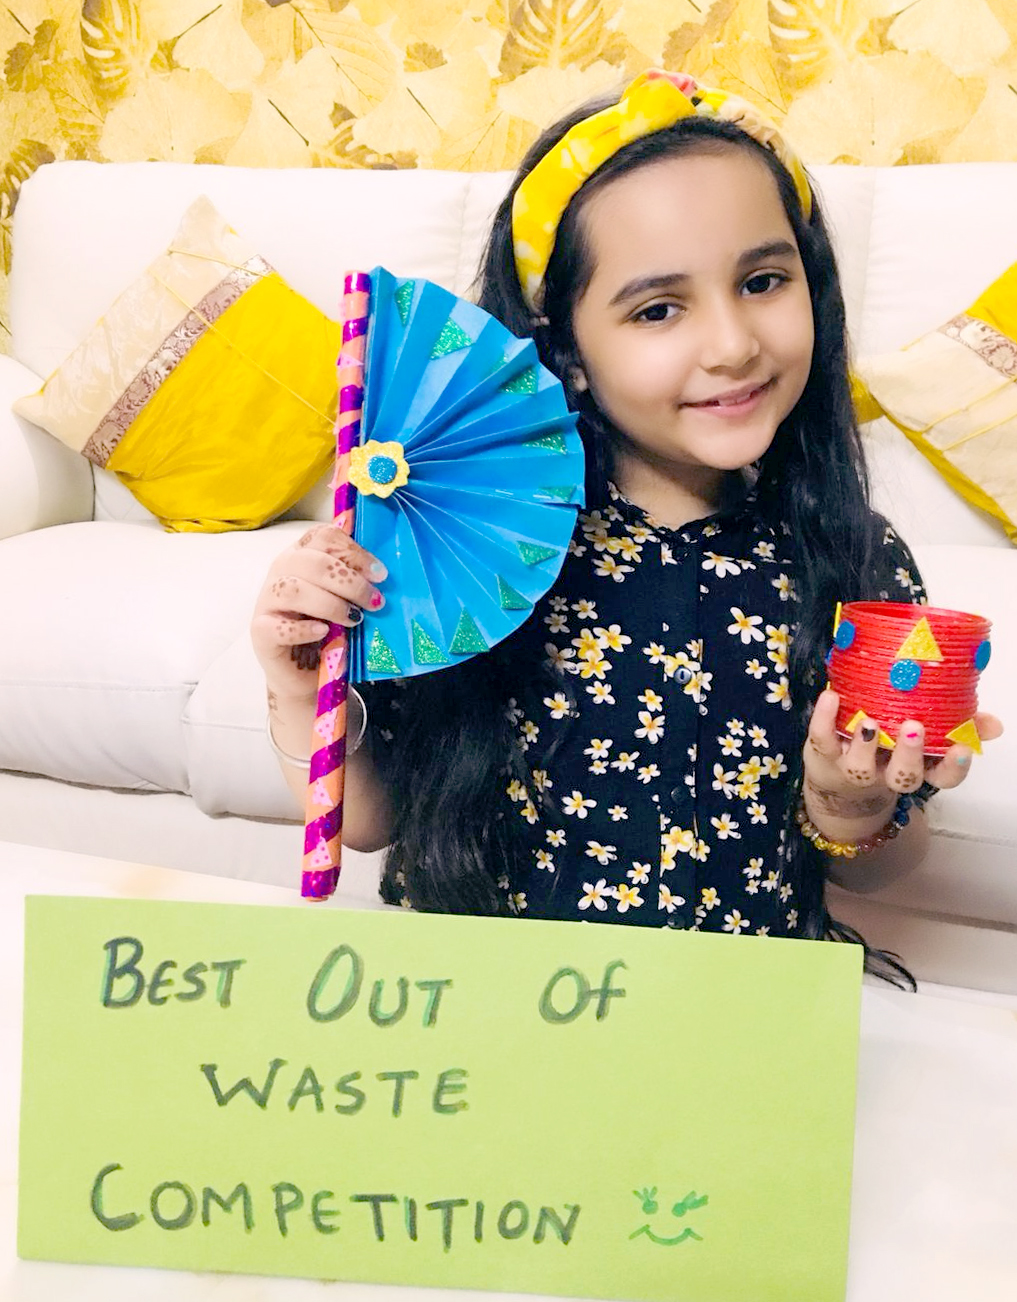 Presidium Vivek Vihar, STUDENTS GO ECO-FRIENDLY AT BEST OUT OF WASTE COMPETITION